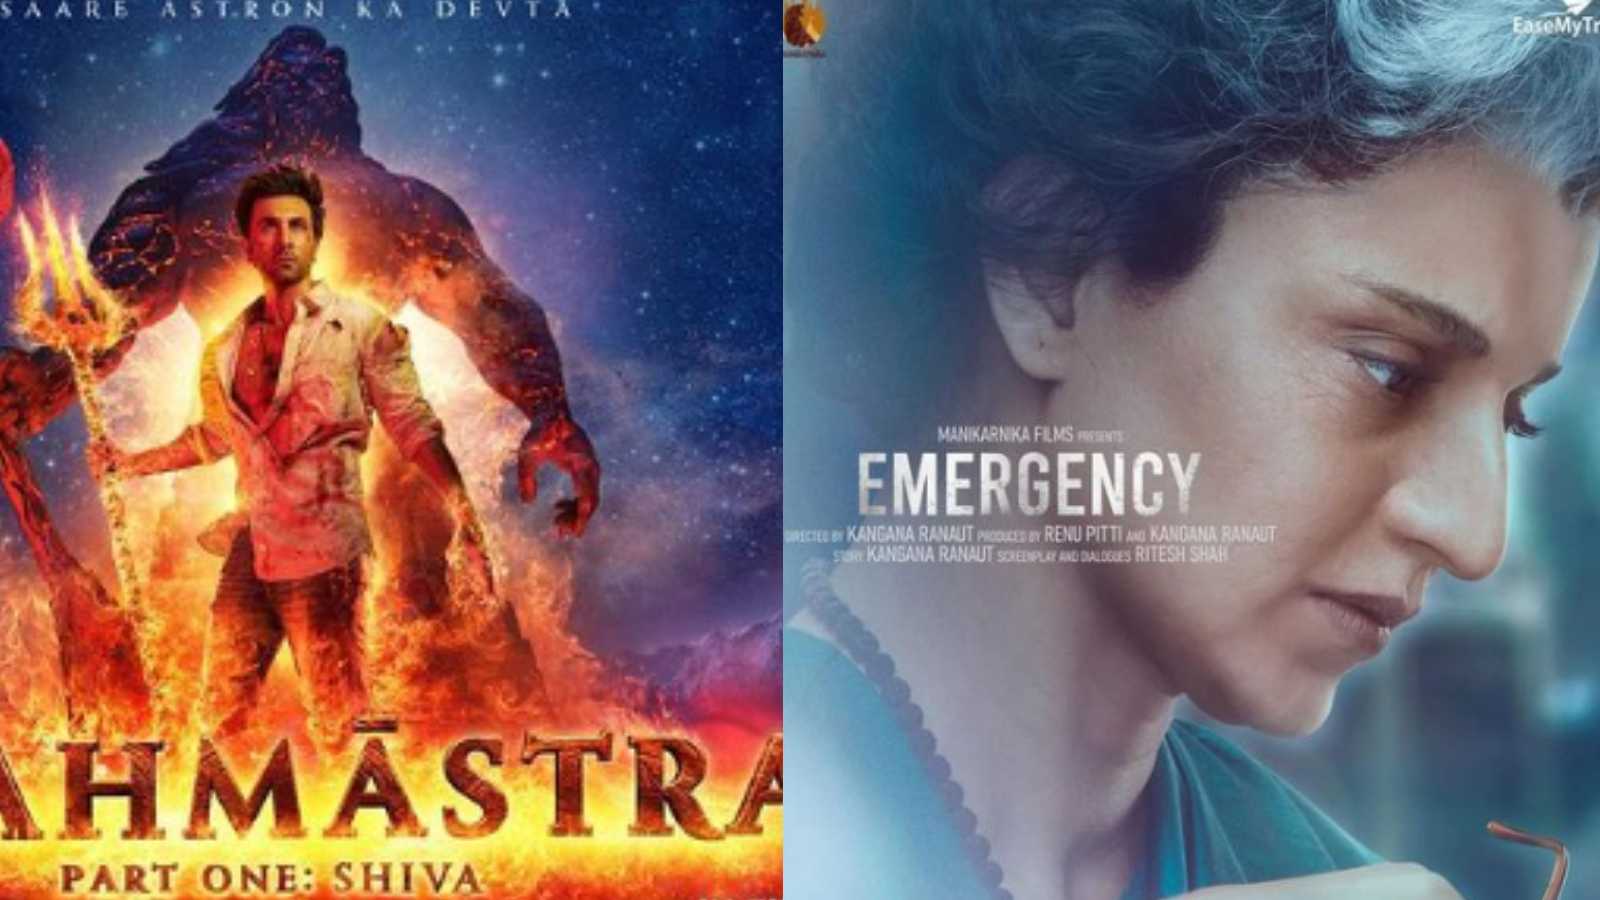 After delivering mega flops, these Bollywood stars still have a chance of redeeming themselves in a BIG way thanks to these upcoming films